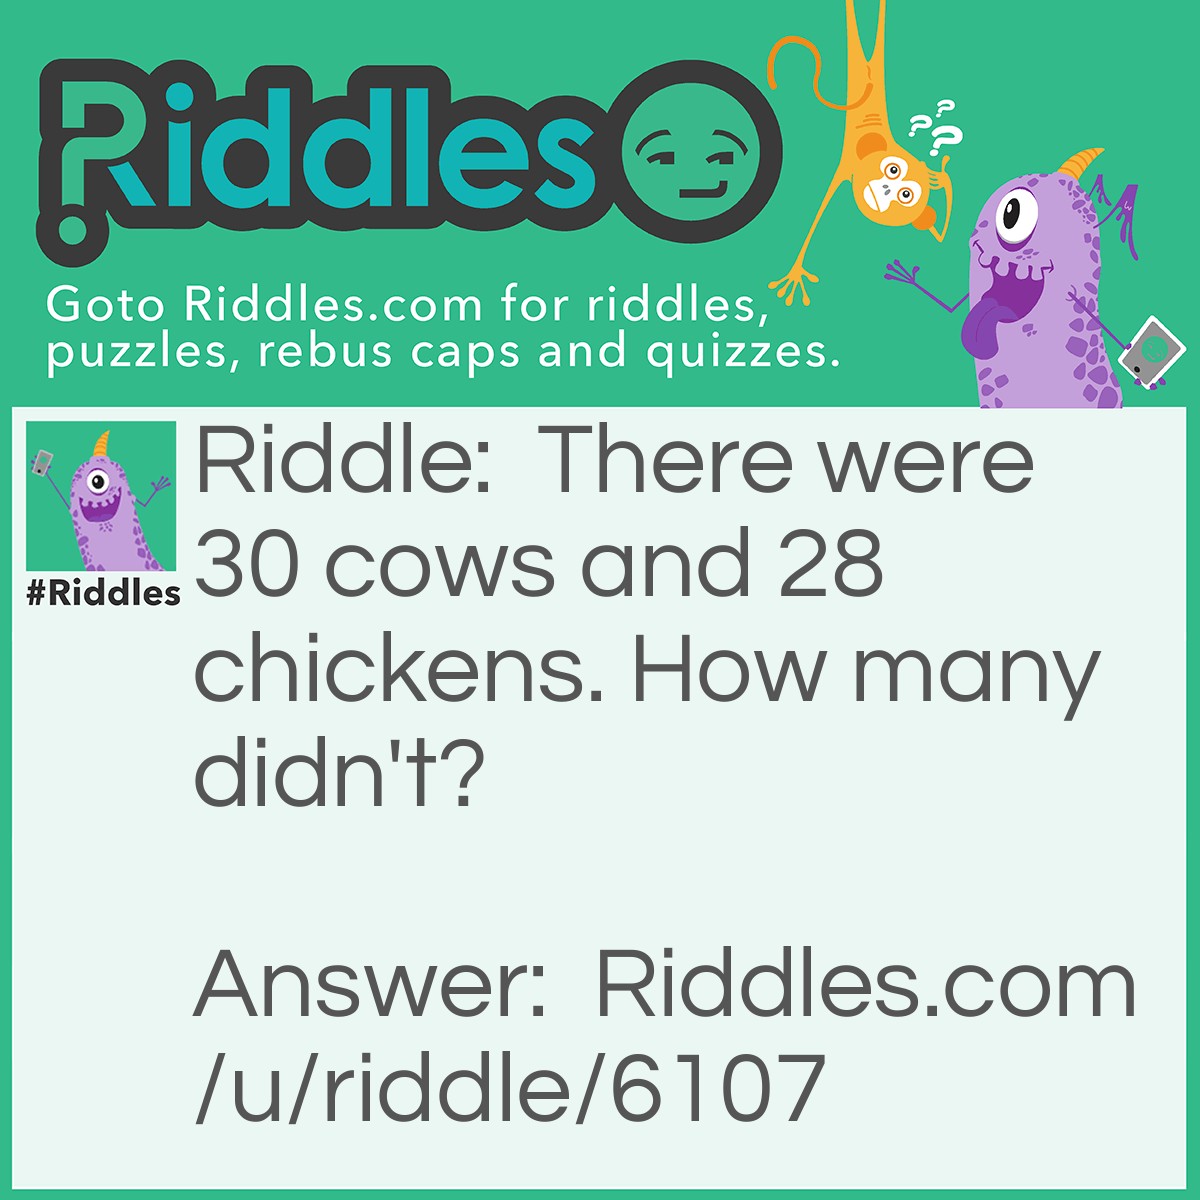 Riddle: There were 30 cows and 28 chickens. How many didn't? Answer: 10, because 20 8-(ate) chickens ten did not.